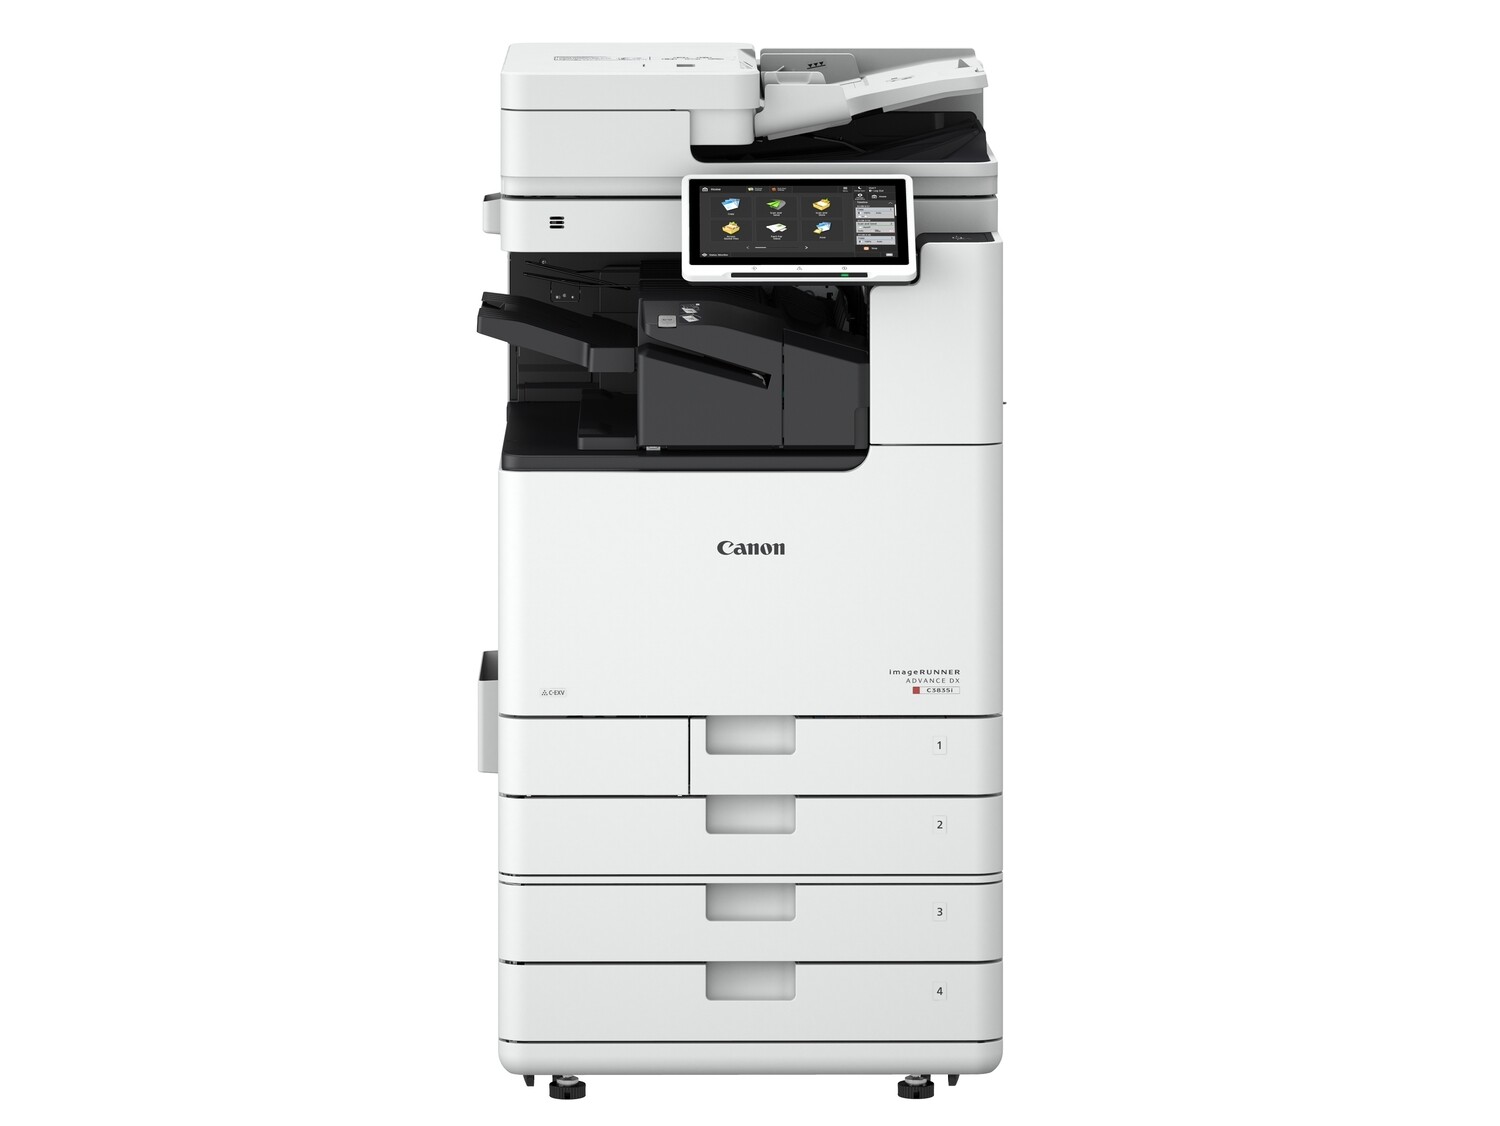 imageRUNNER ADVANCE DX C3822i (with DADF, Stend)